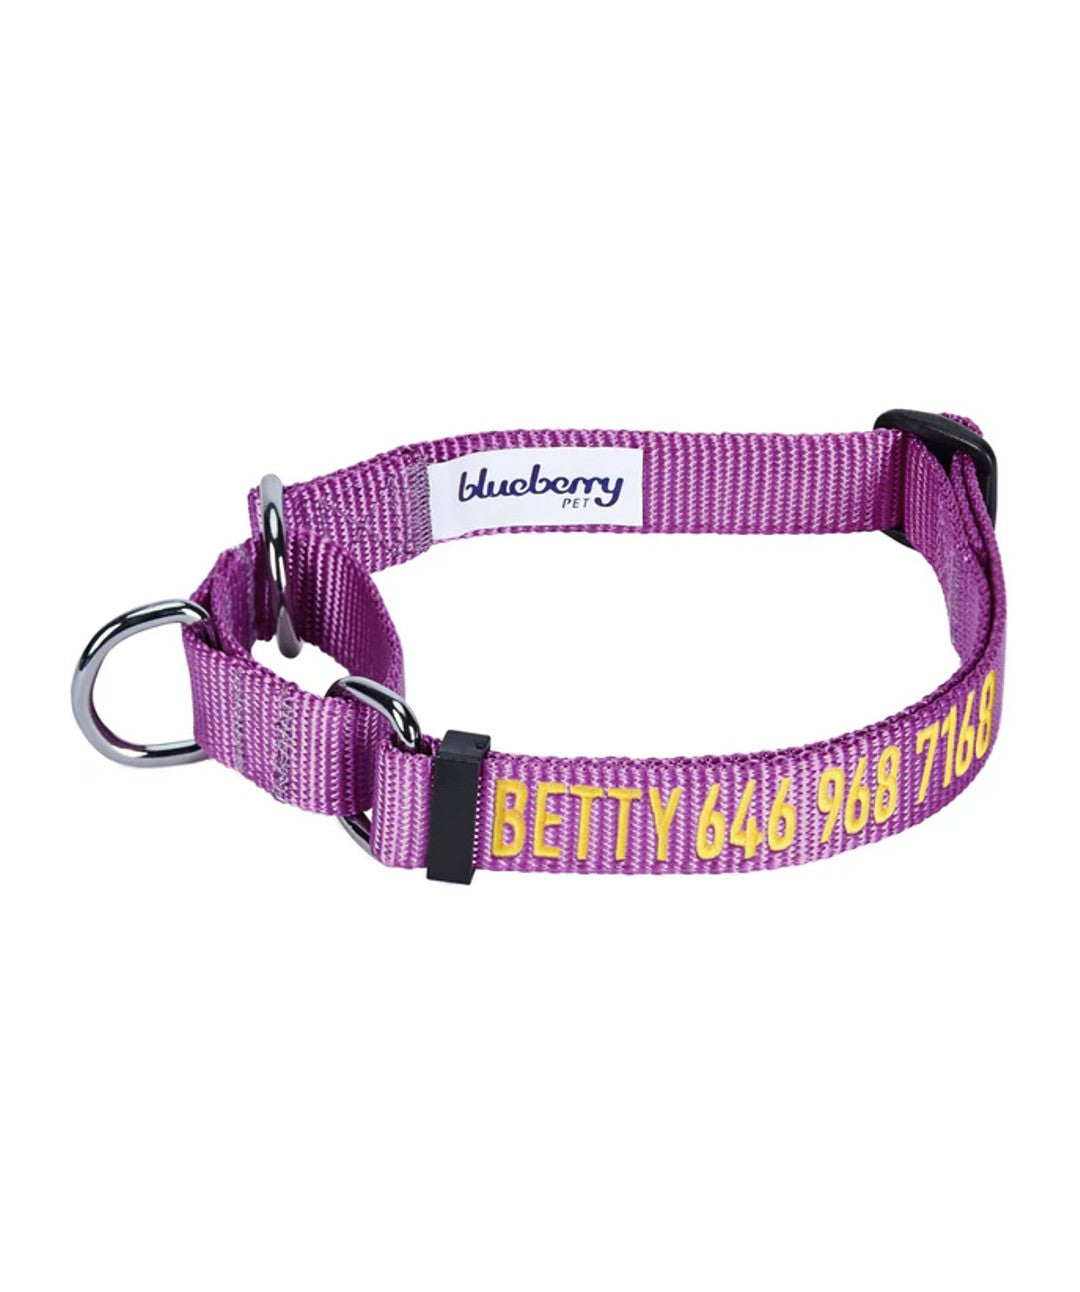 Blueberry Pet Nylon Martingale Personalized Dog Collar Collar Blueberry Pet Violet S 